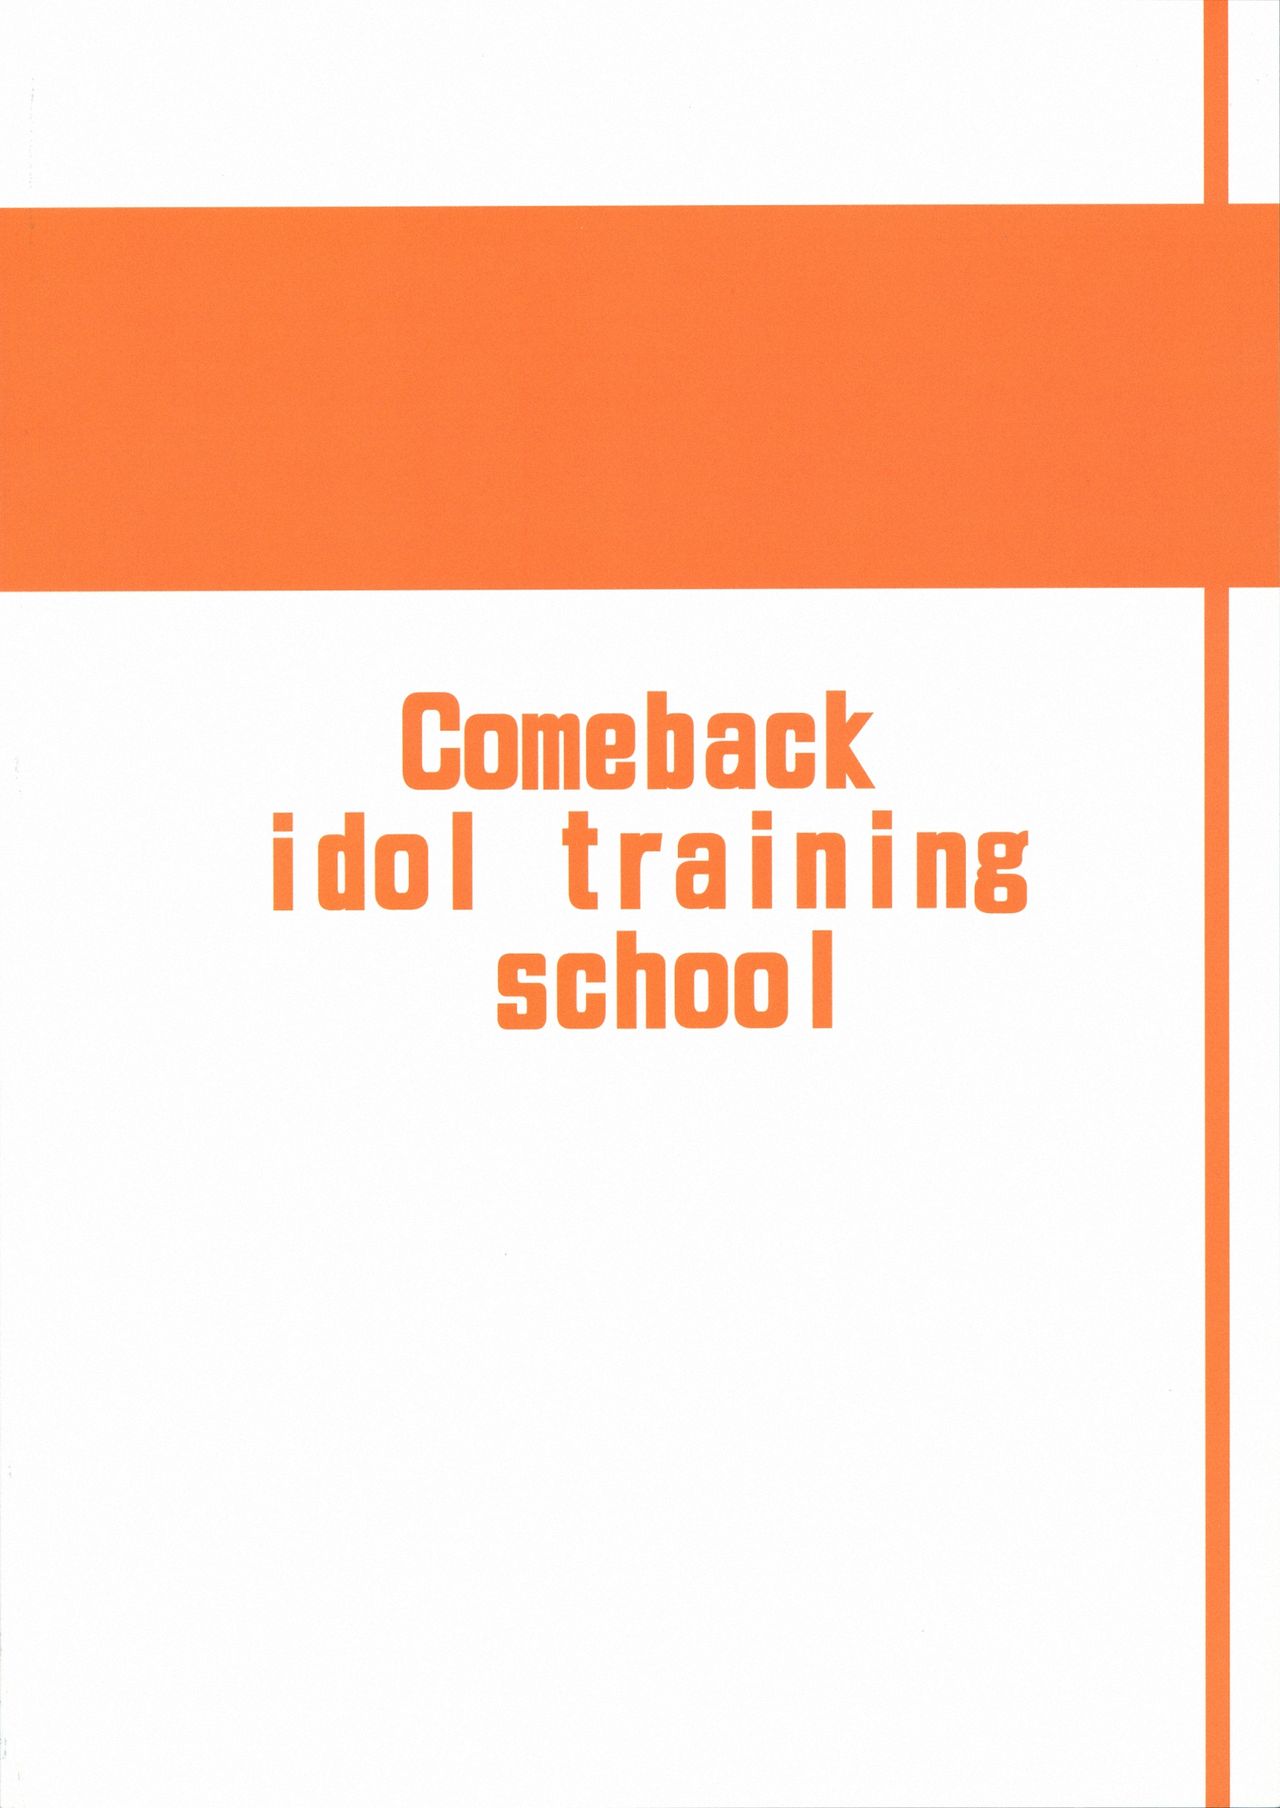 (C84) [Forever and ever.. (Eisen)] Comeback idol training school (THE iDOLM@STER) (C84) [Forever and ever... (英戦)] Comeback idol training school (アイドルマスター)